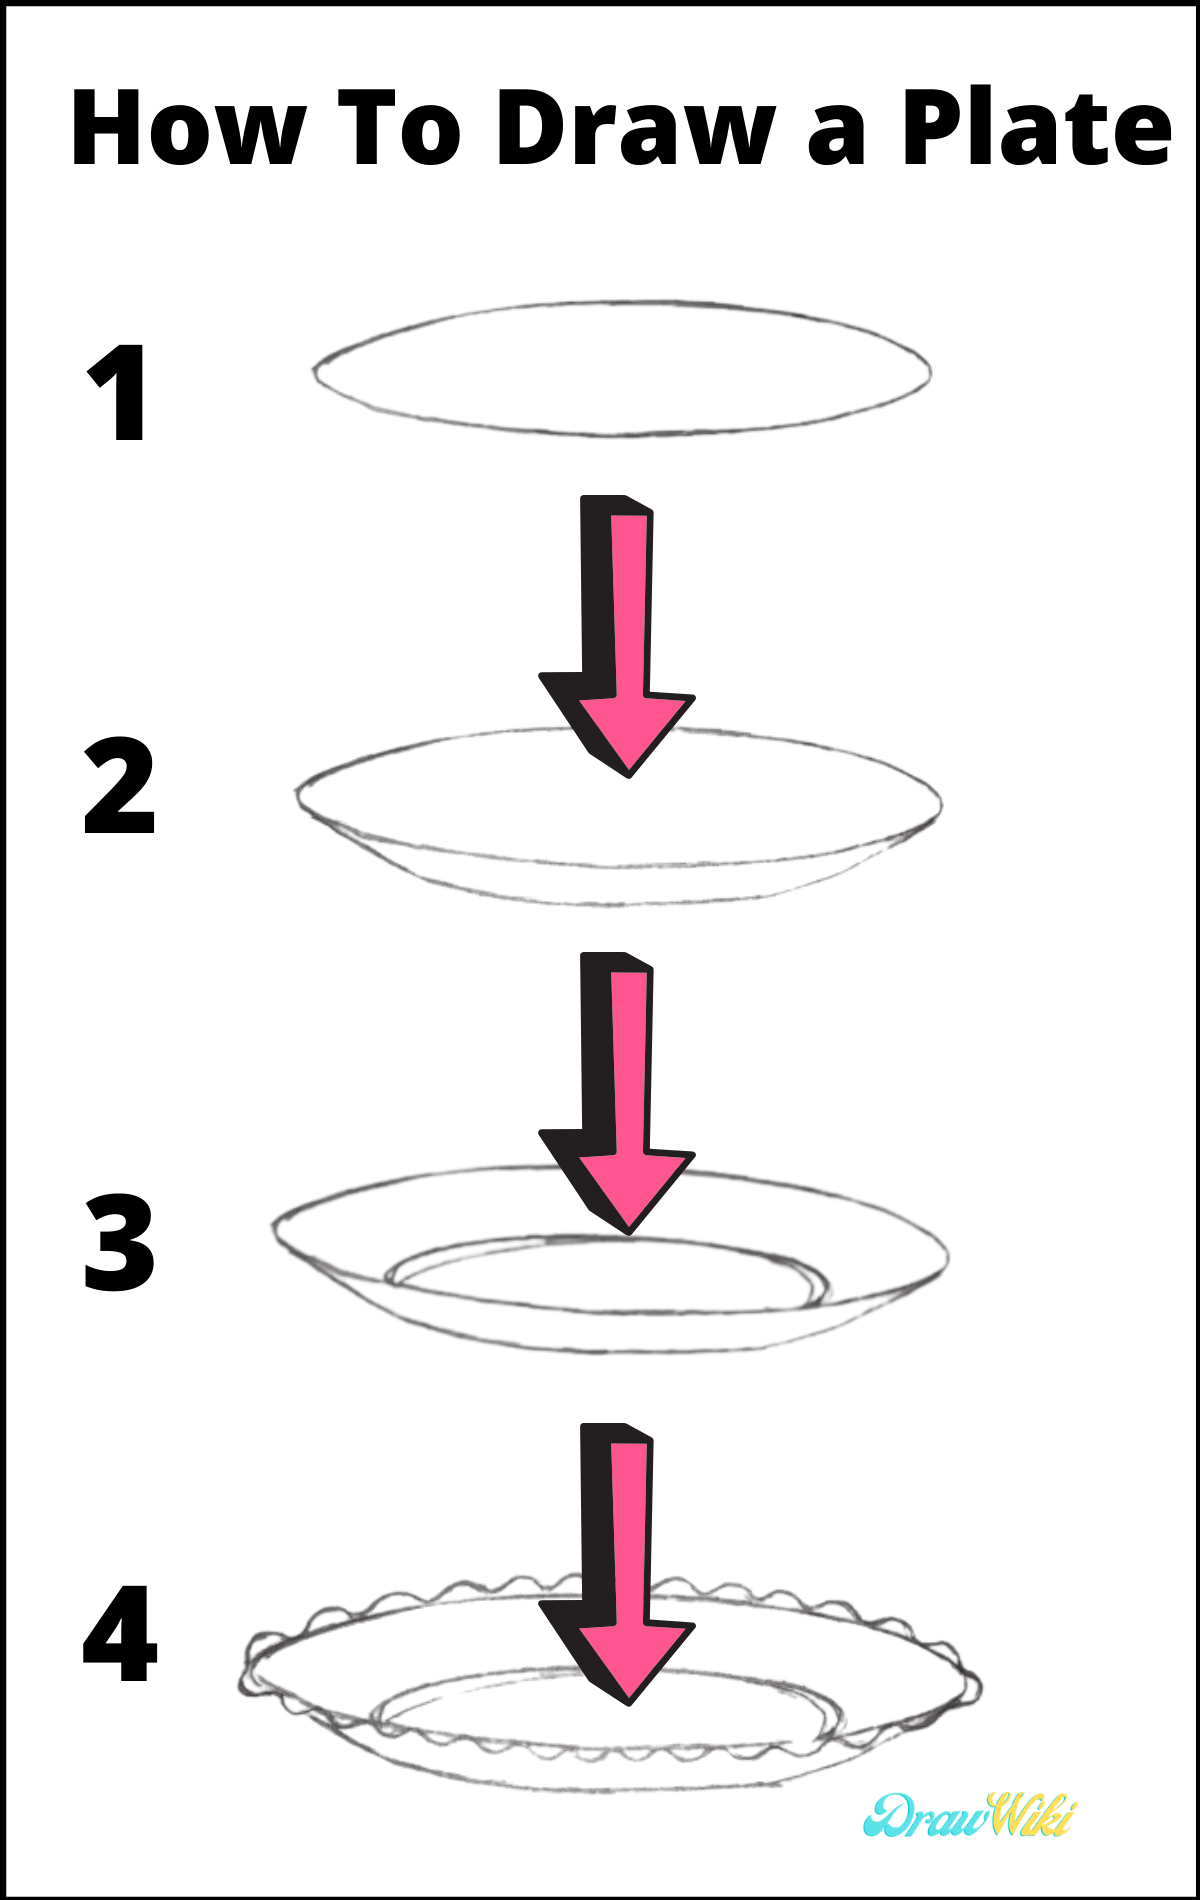 How To Draw a Plate step by step